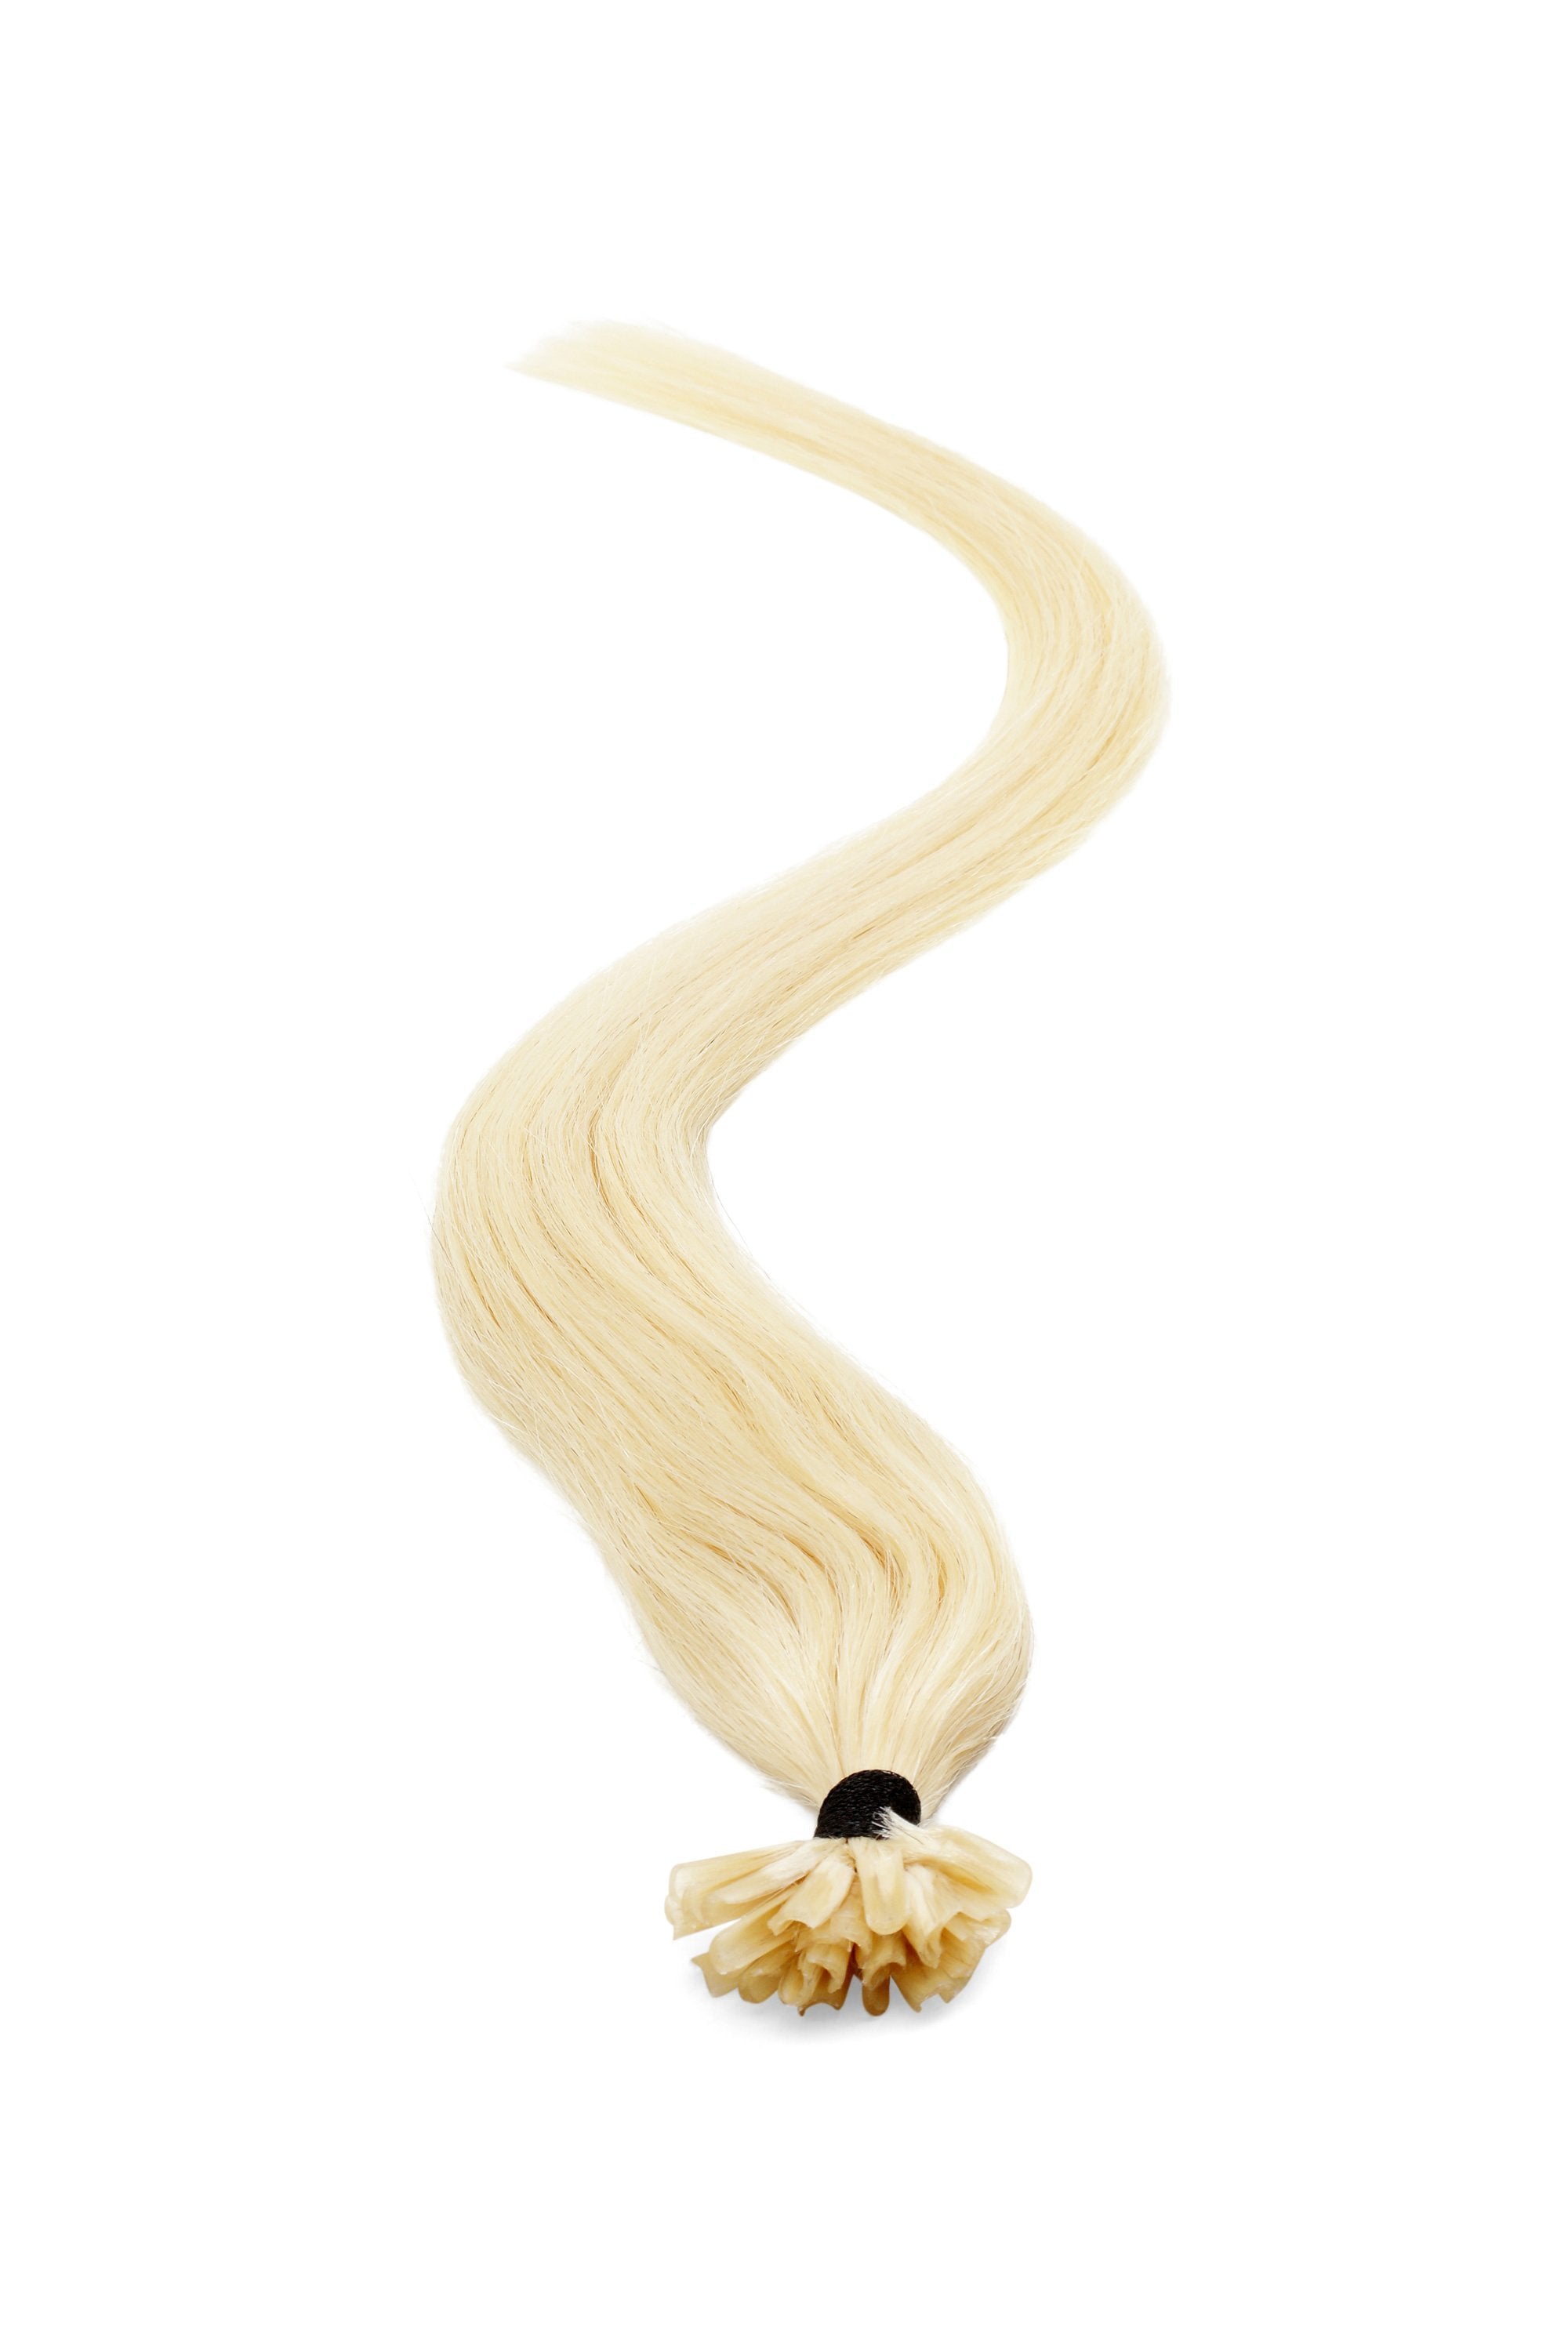 U Tip Hair Extensions 18" Blondest Blonde (60) - Beauty Hair Products LtdHair Extensions